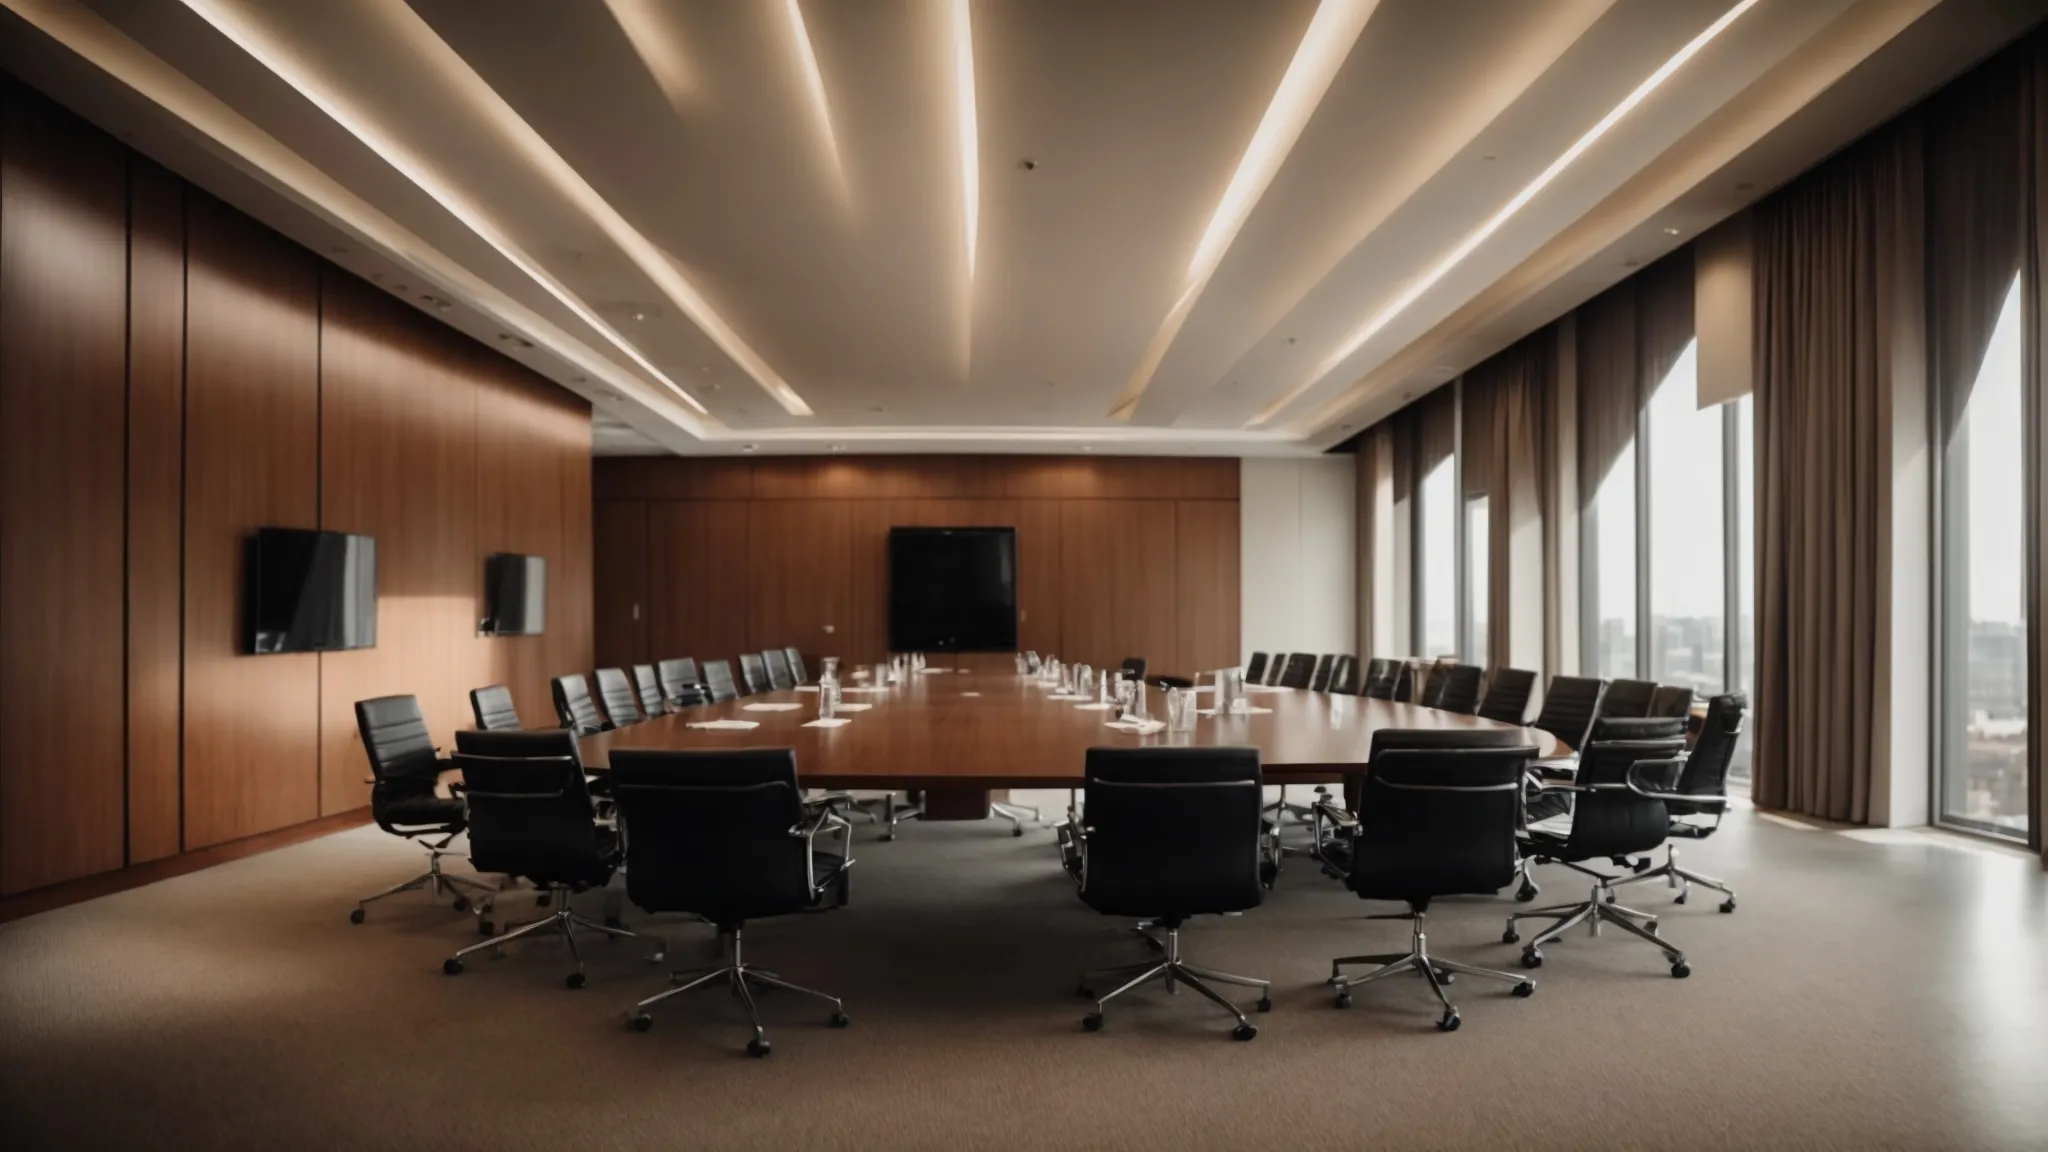 a polished conference room with a large table surrounded by chairs, indicating a professional meeting about to take place.